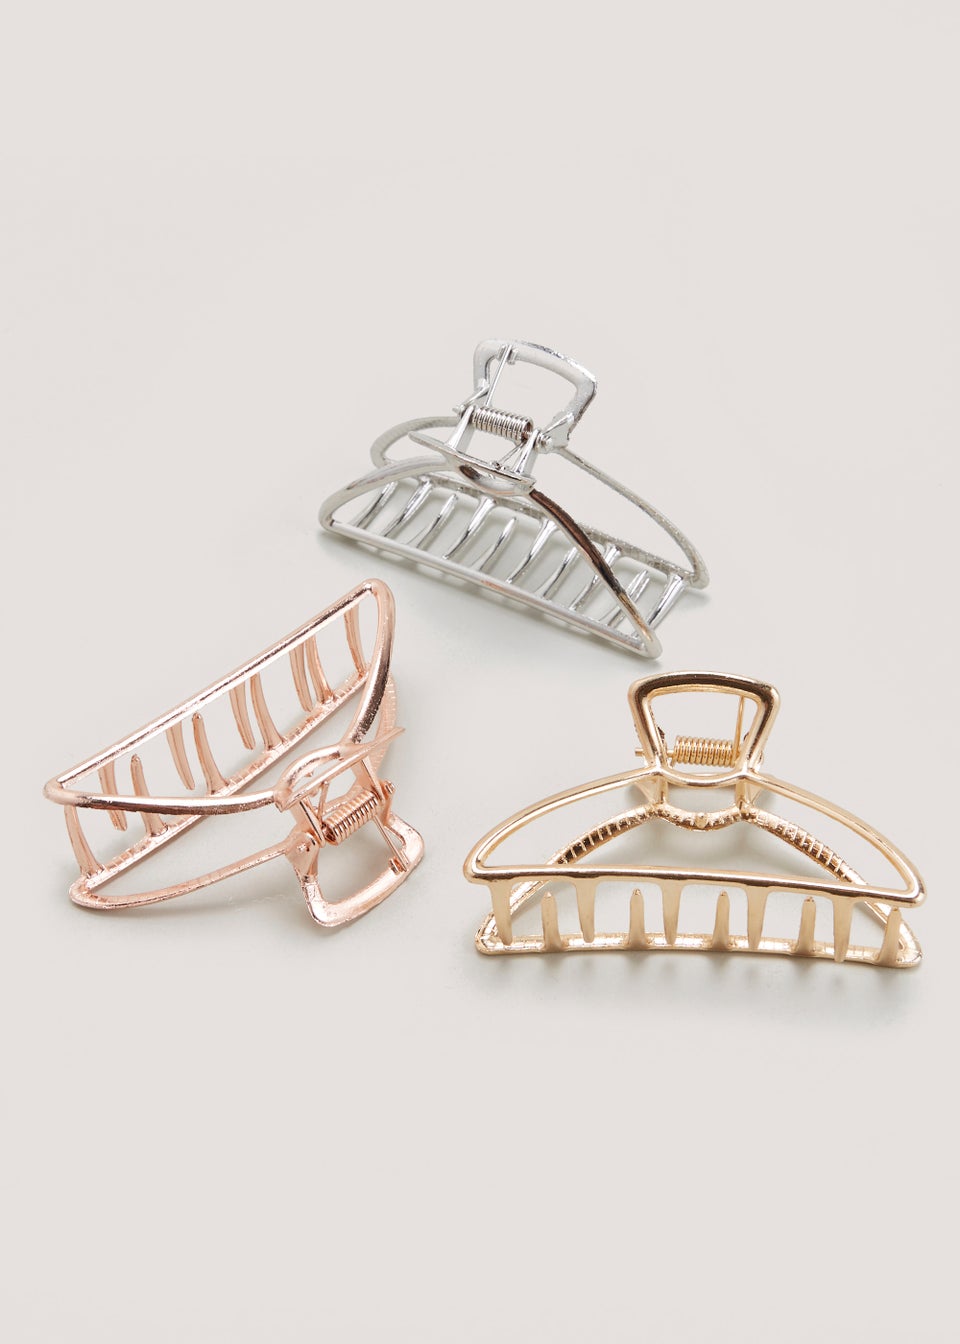 Beauty Collective Set of 3 Wire Hair Clamps